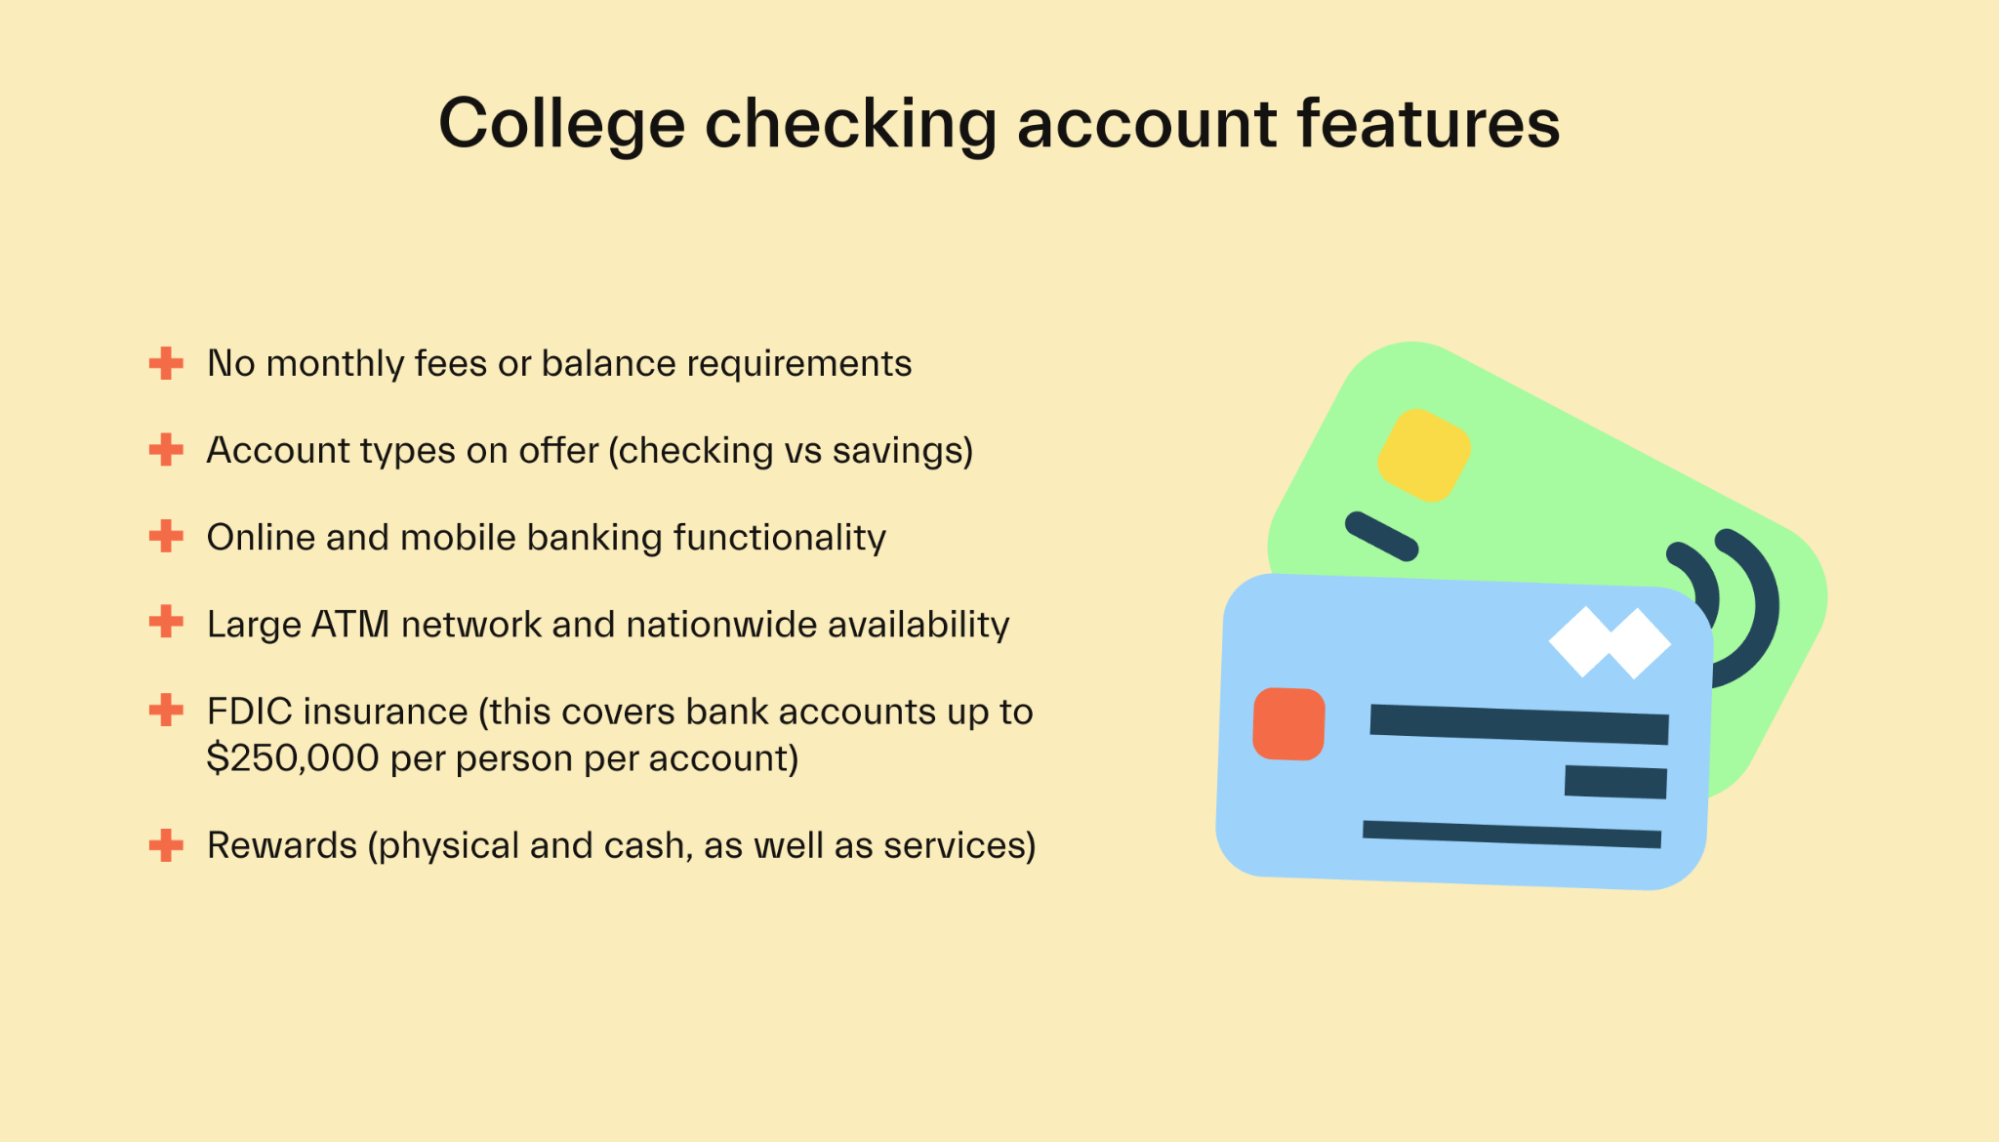 College checking account features